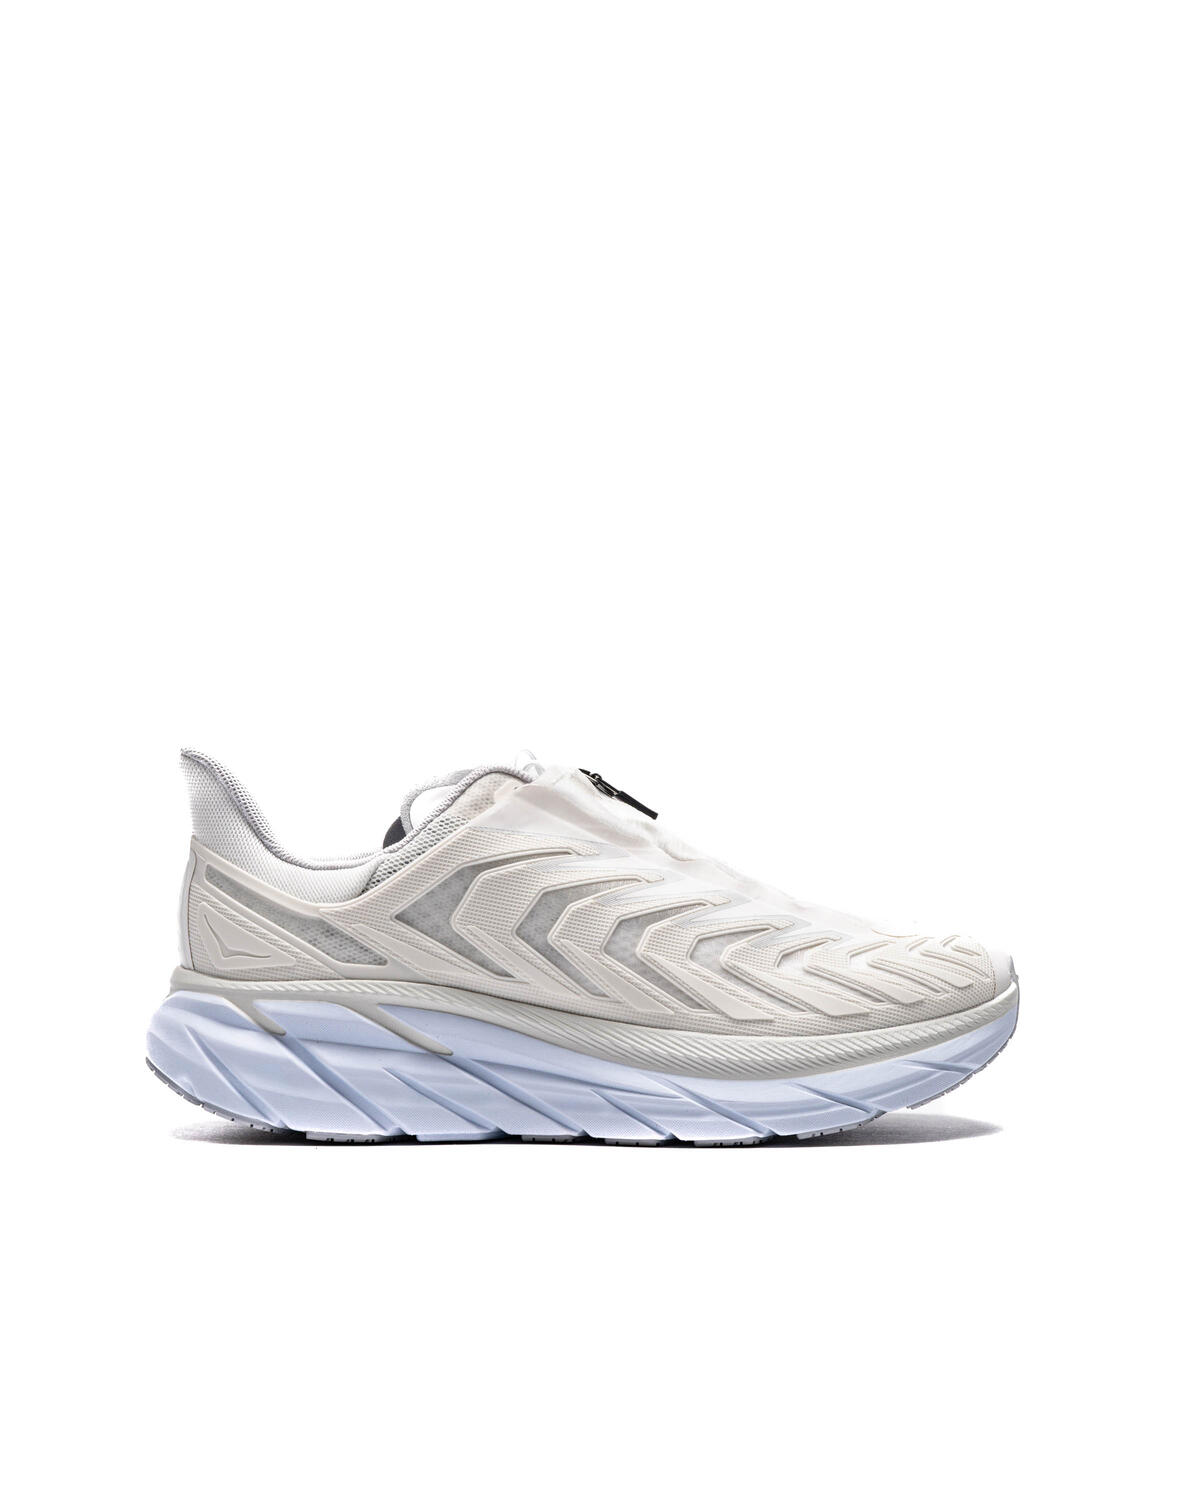 Hoka One One PROJECT CLIFTON | 1127924-BDBLR | AFEW STORE